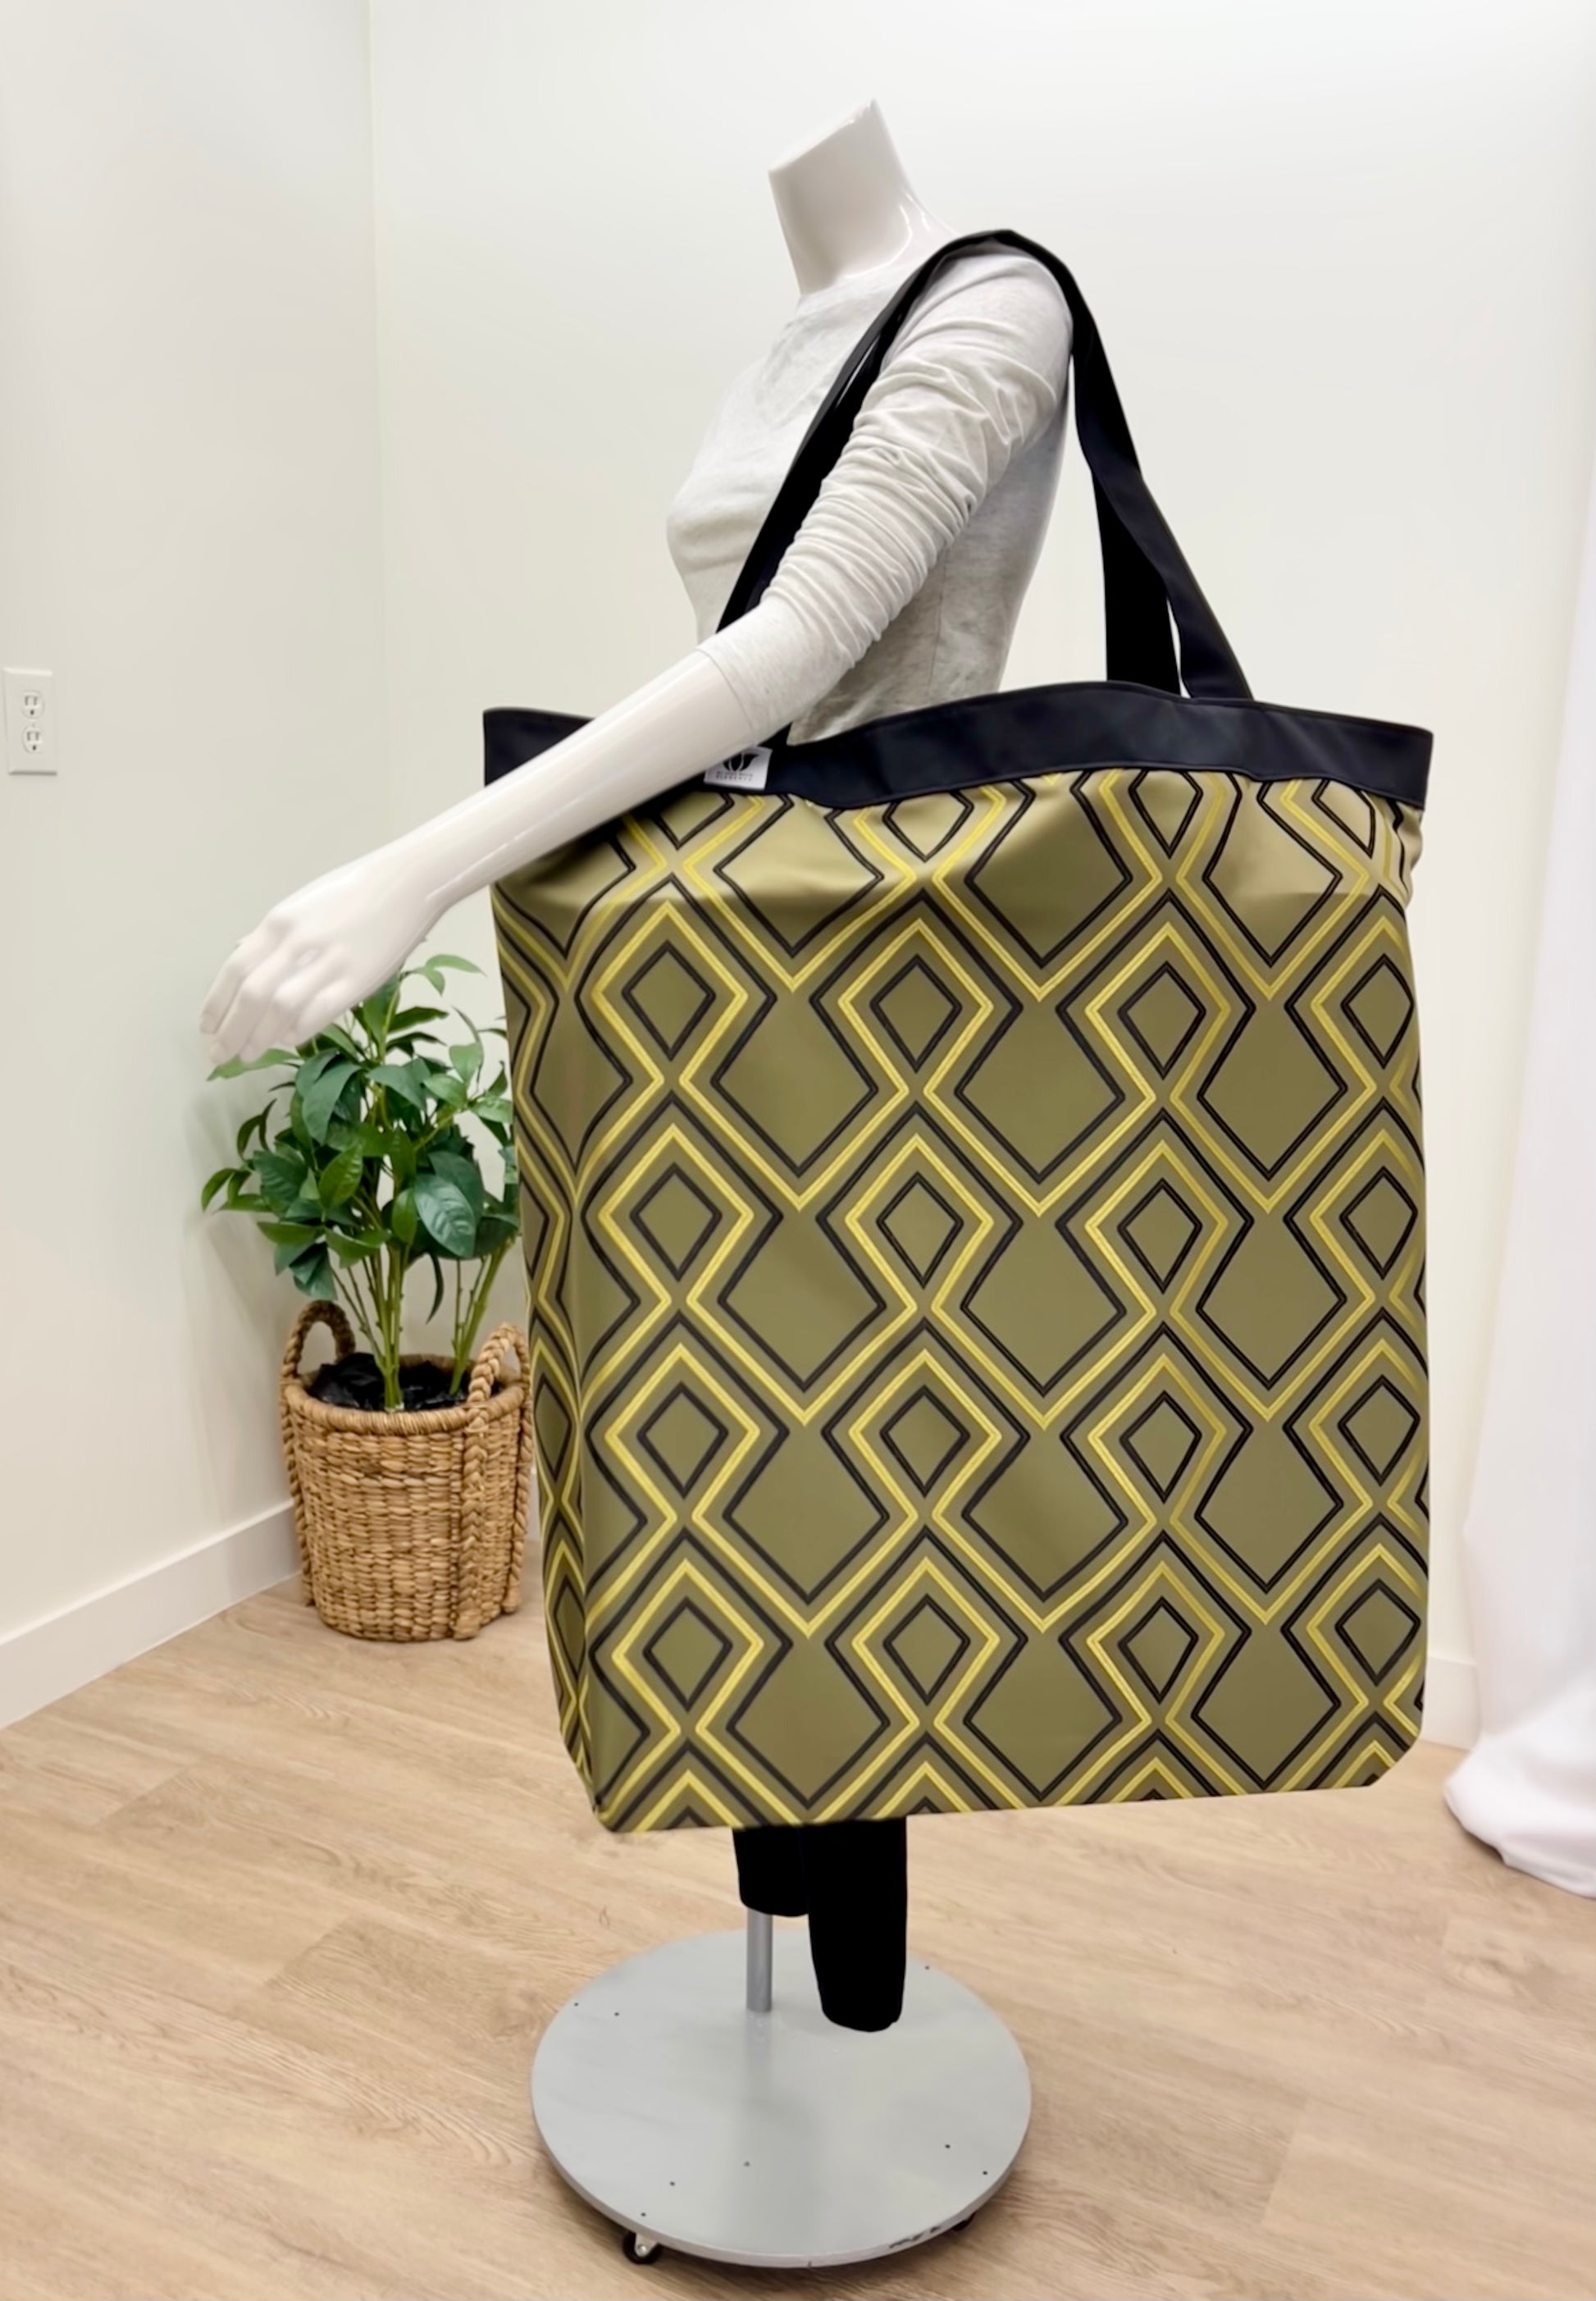 Extra large yoga mat bag to carry all your additional support props. Green gold diamond modern graphic print. Made in Canada by My Yoga Room Elements